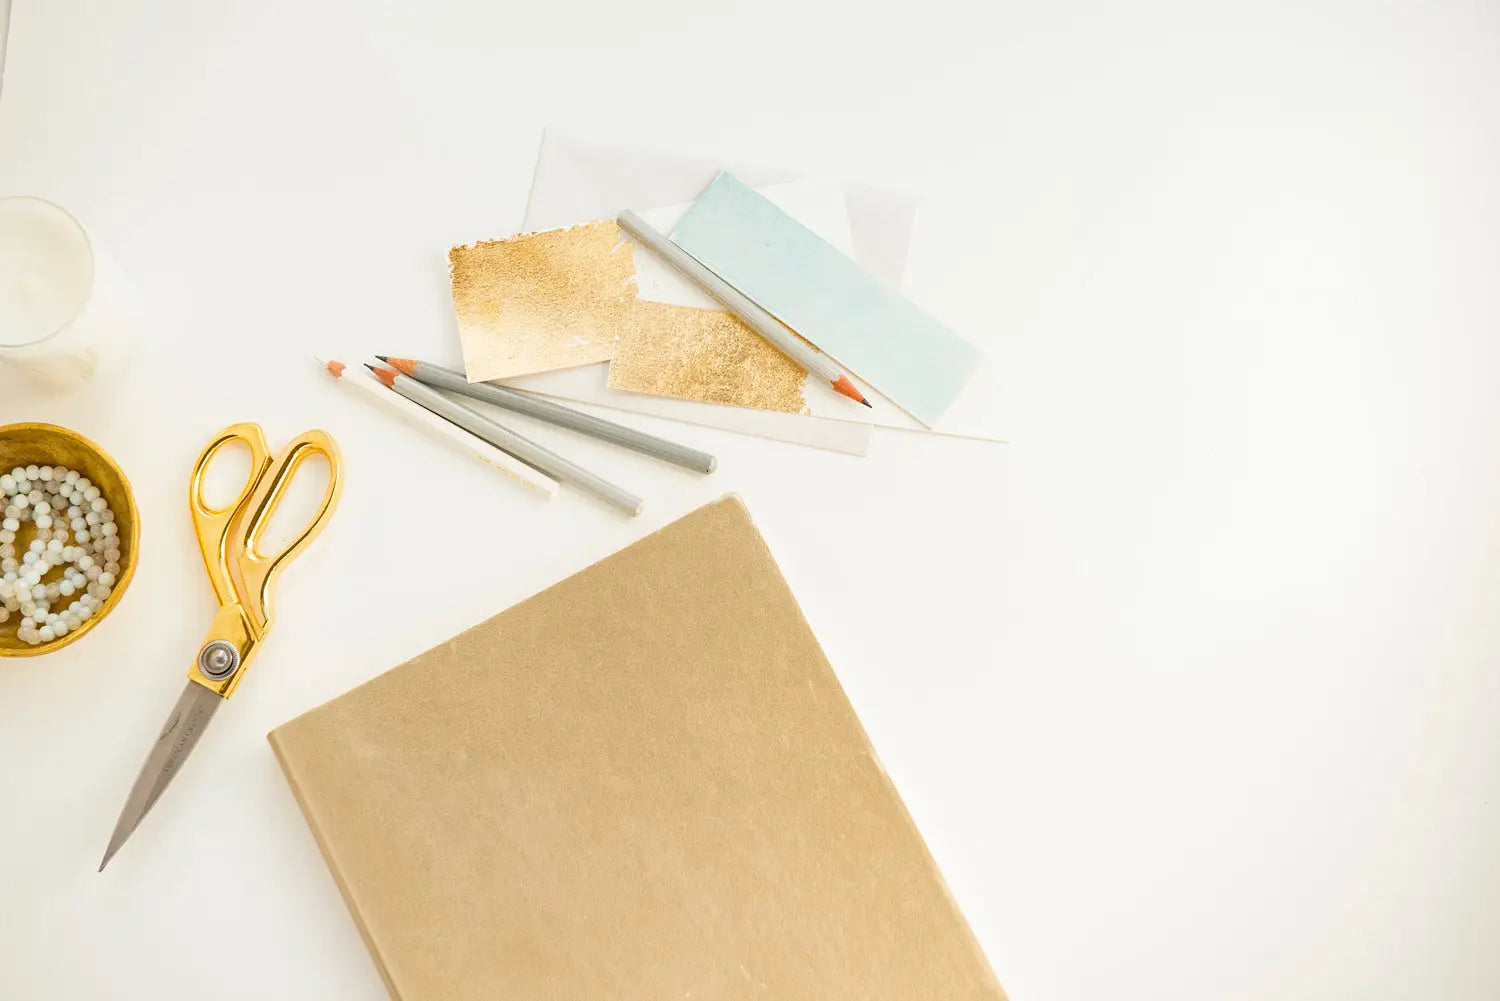 Essential Tools and Tips for Stationery Designers